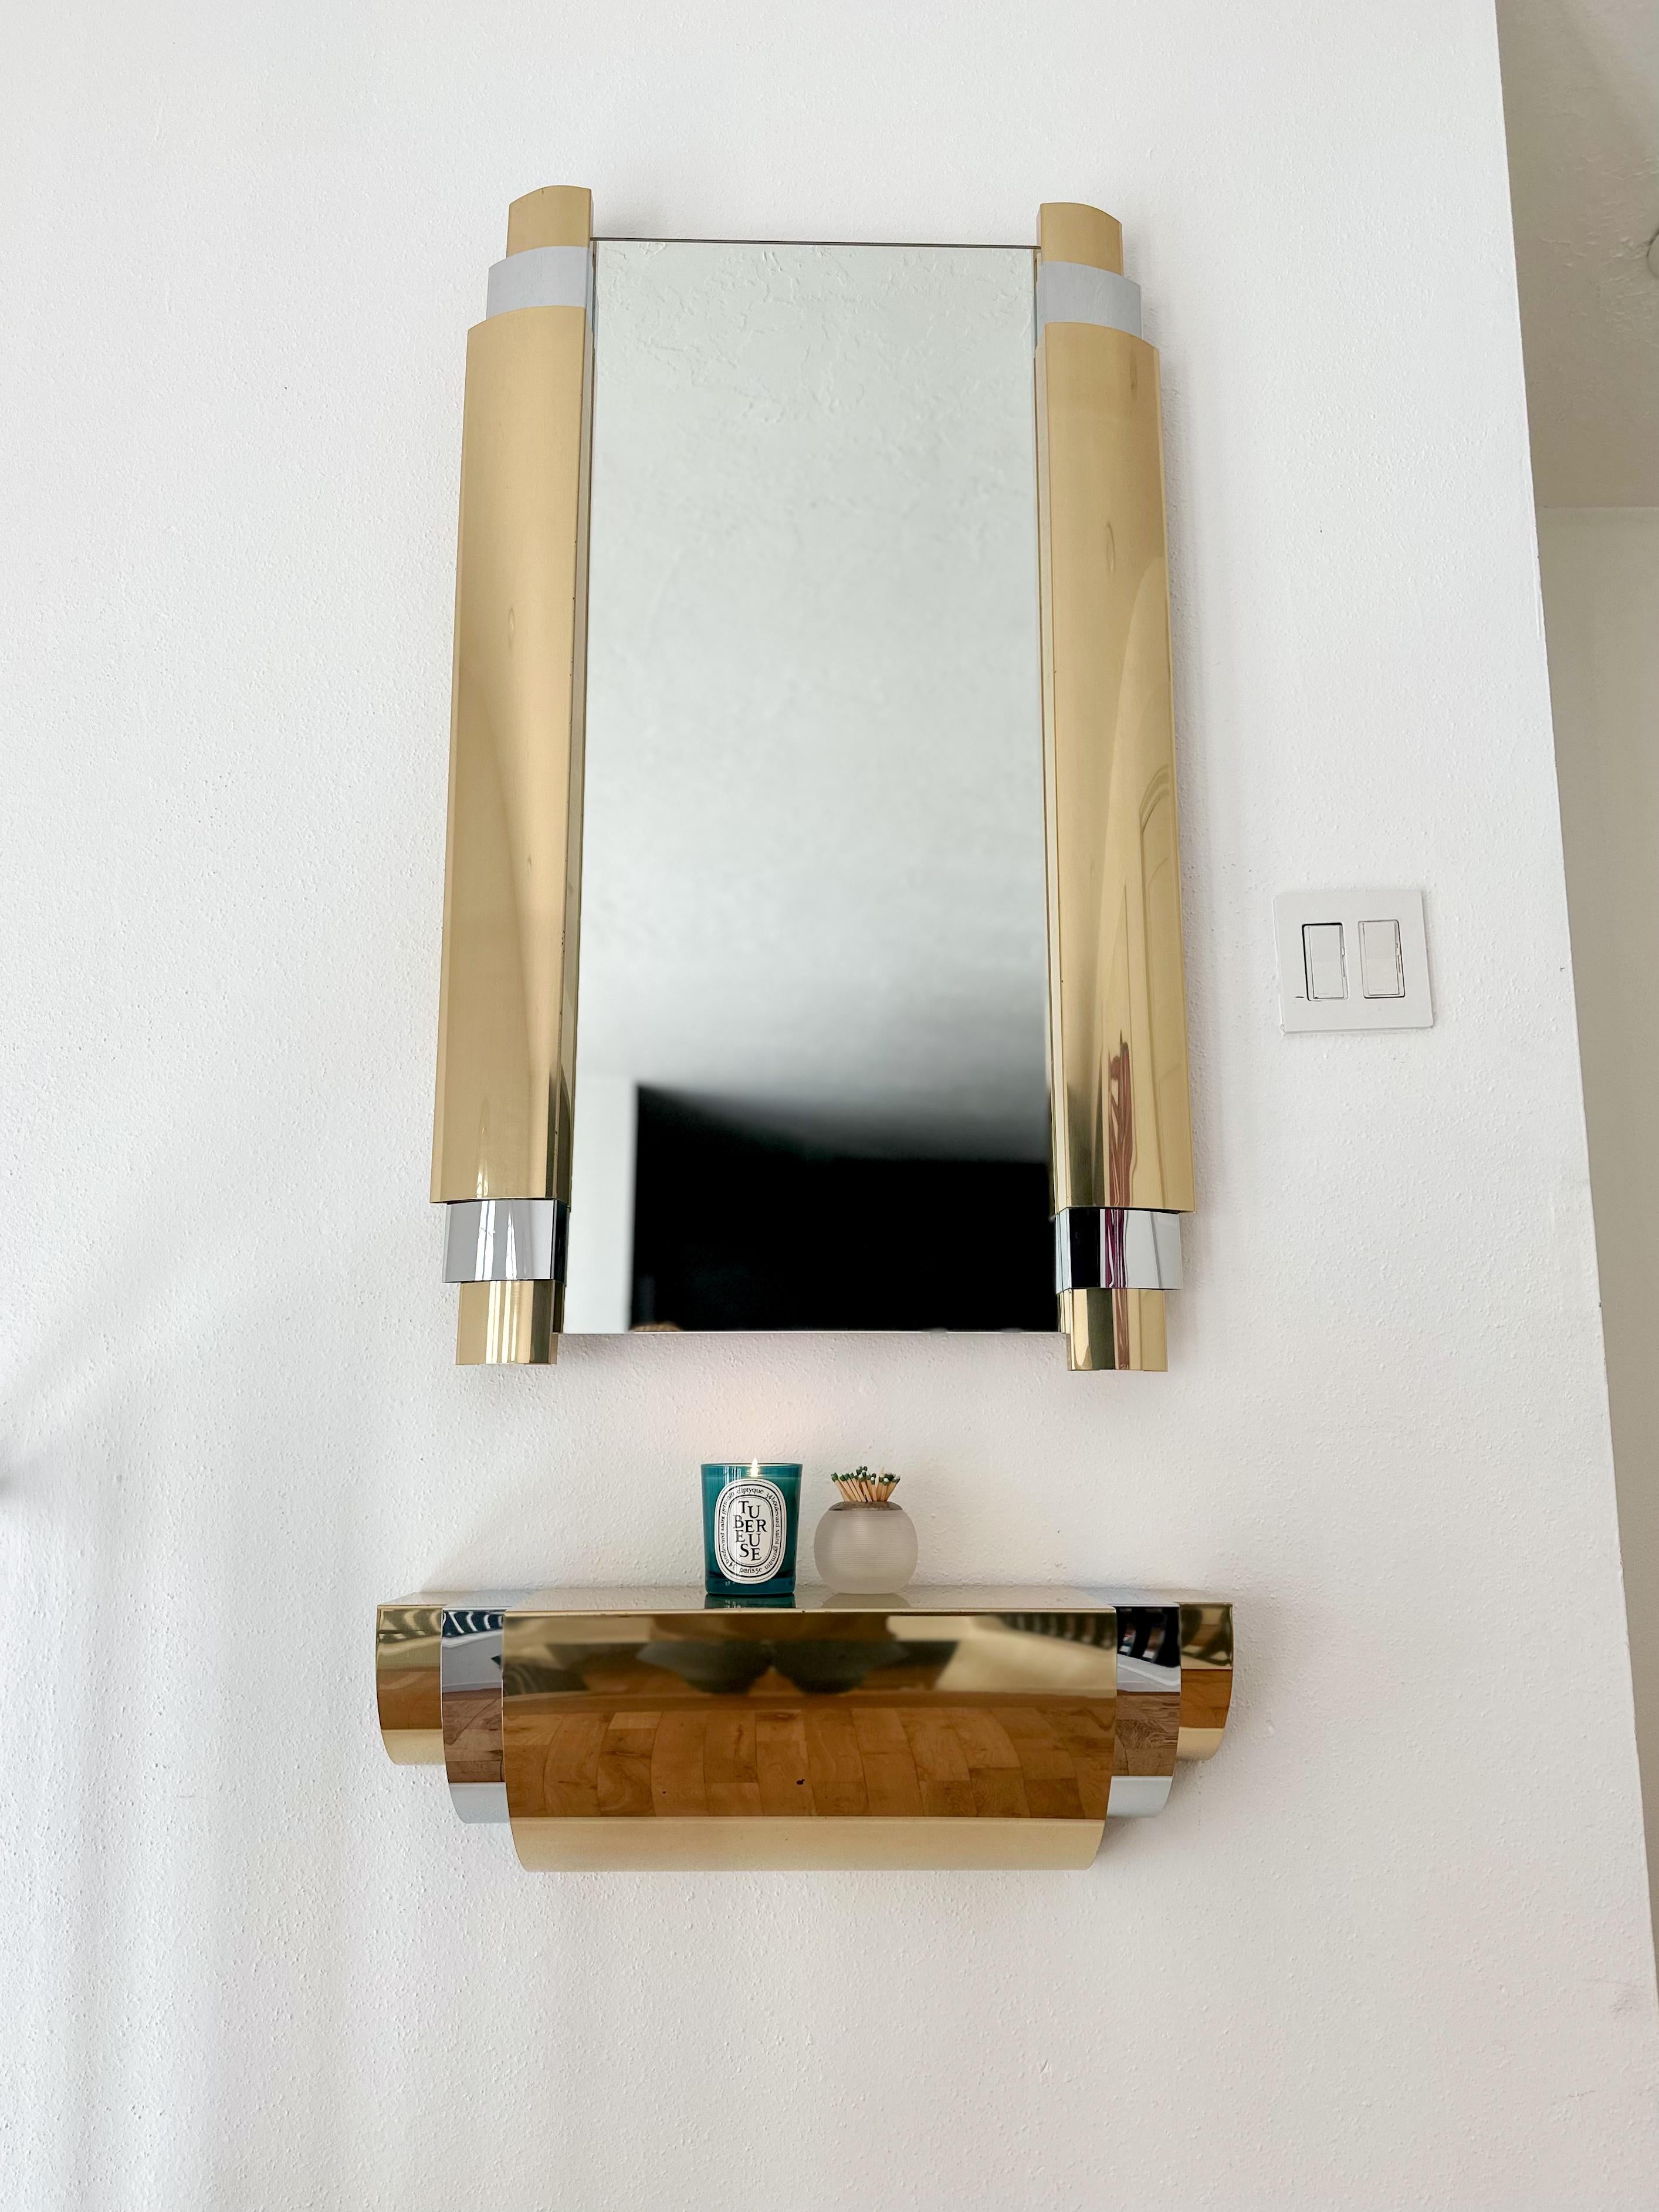 Rare Art Deco style brass and chrome mirror and shelf set designed by Curtis Jeré for Artisan House, c.1985. Wall-mounted and slender in profile, you don't need much wall space to give this set the perfect home. Super sleek and ultra-glam, this pair